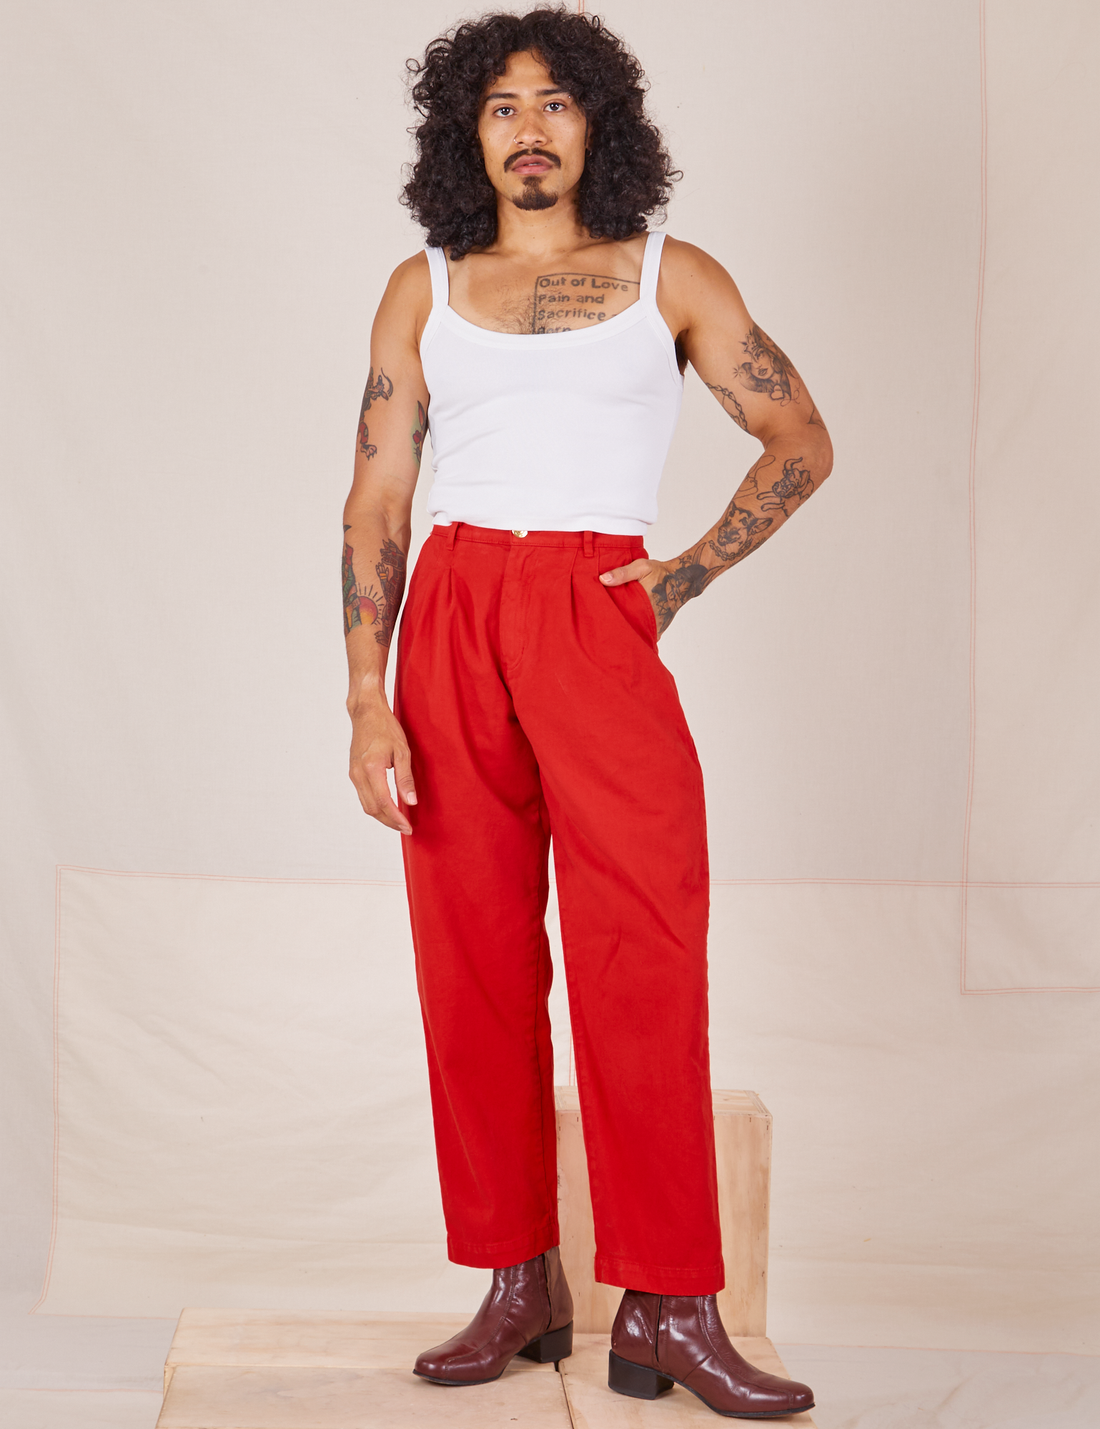 Jesse is 5'8" and wearing XXS Heavyweight Trousers in Mustang Red paired with vintage off-white Cropped Cami